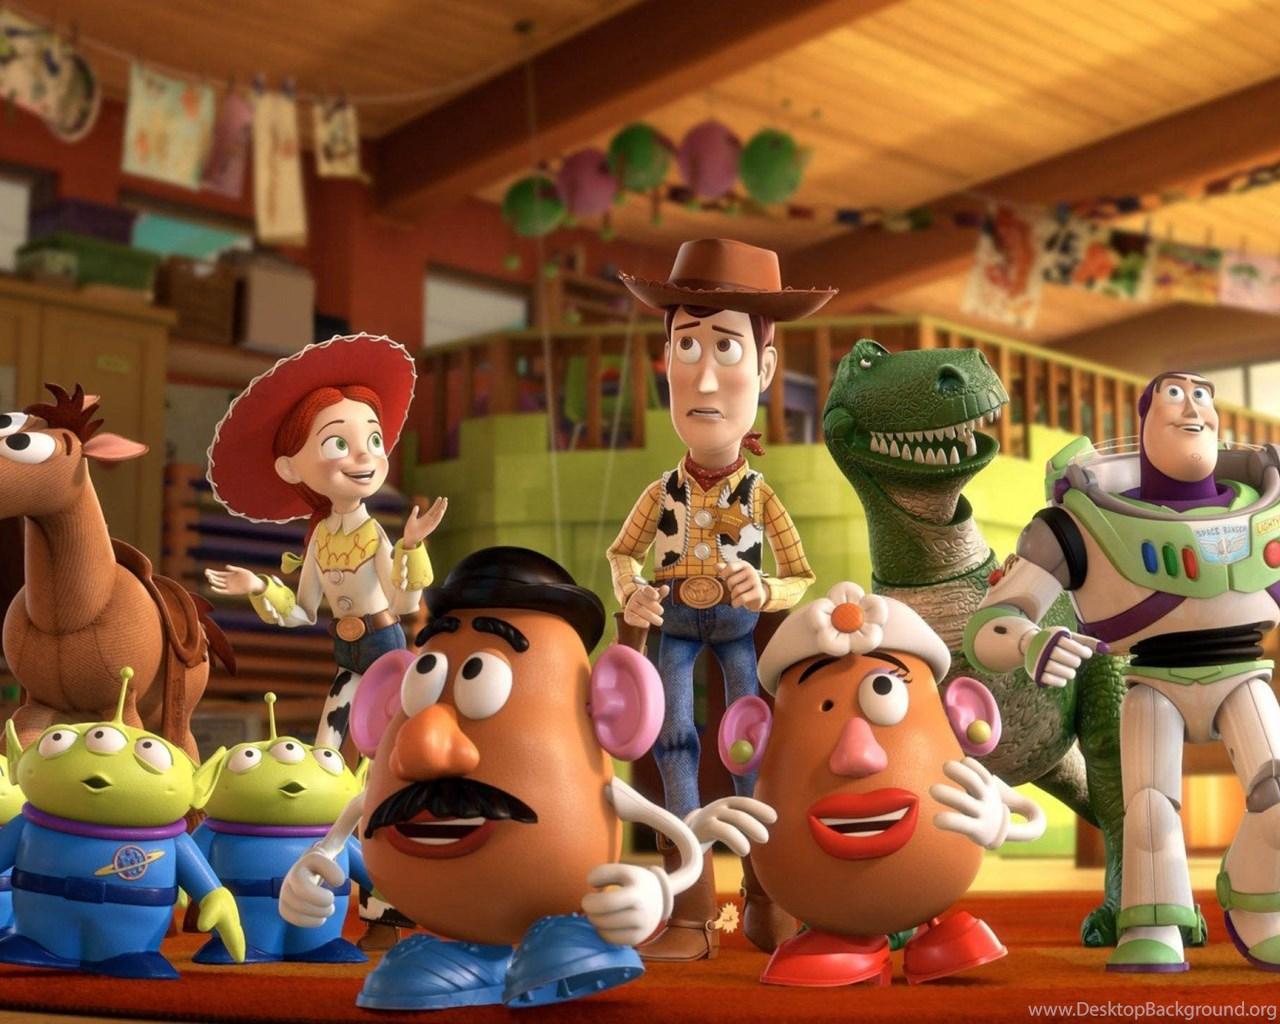 toy story 1 2 3